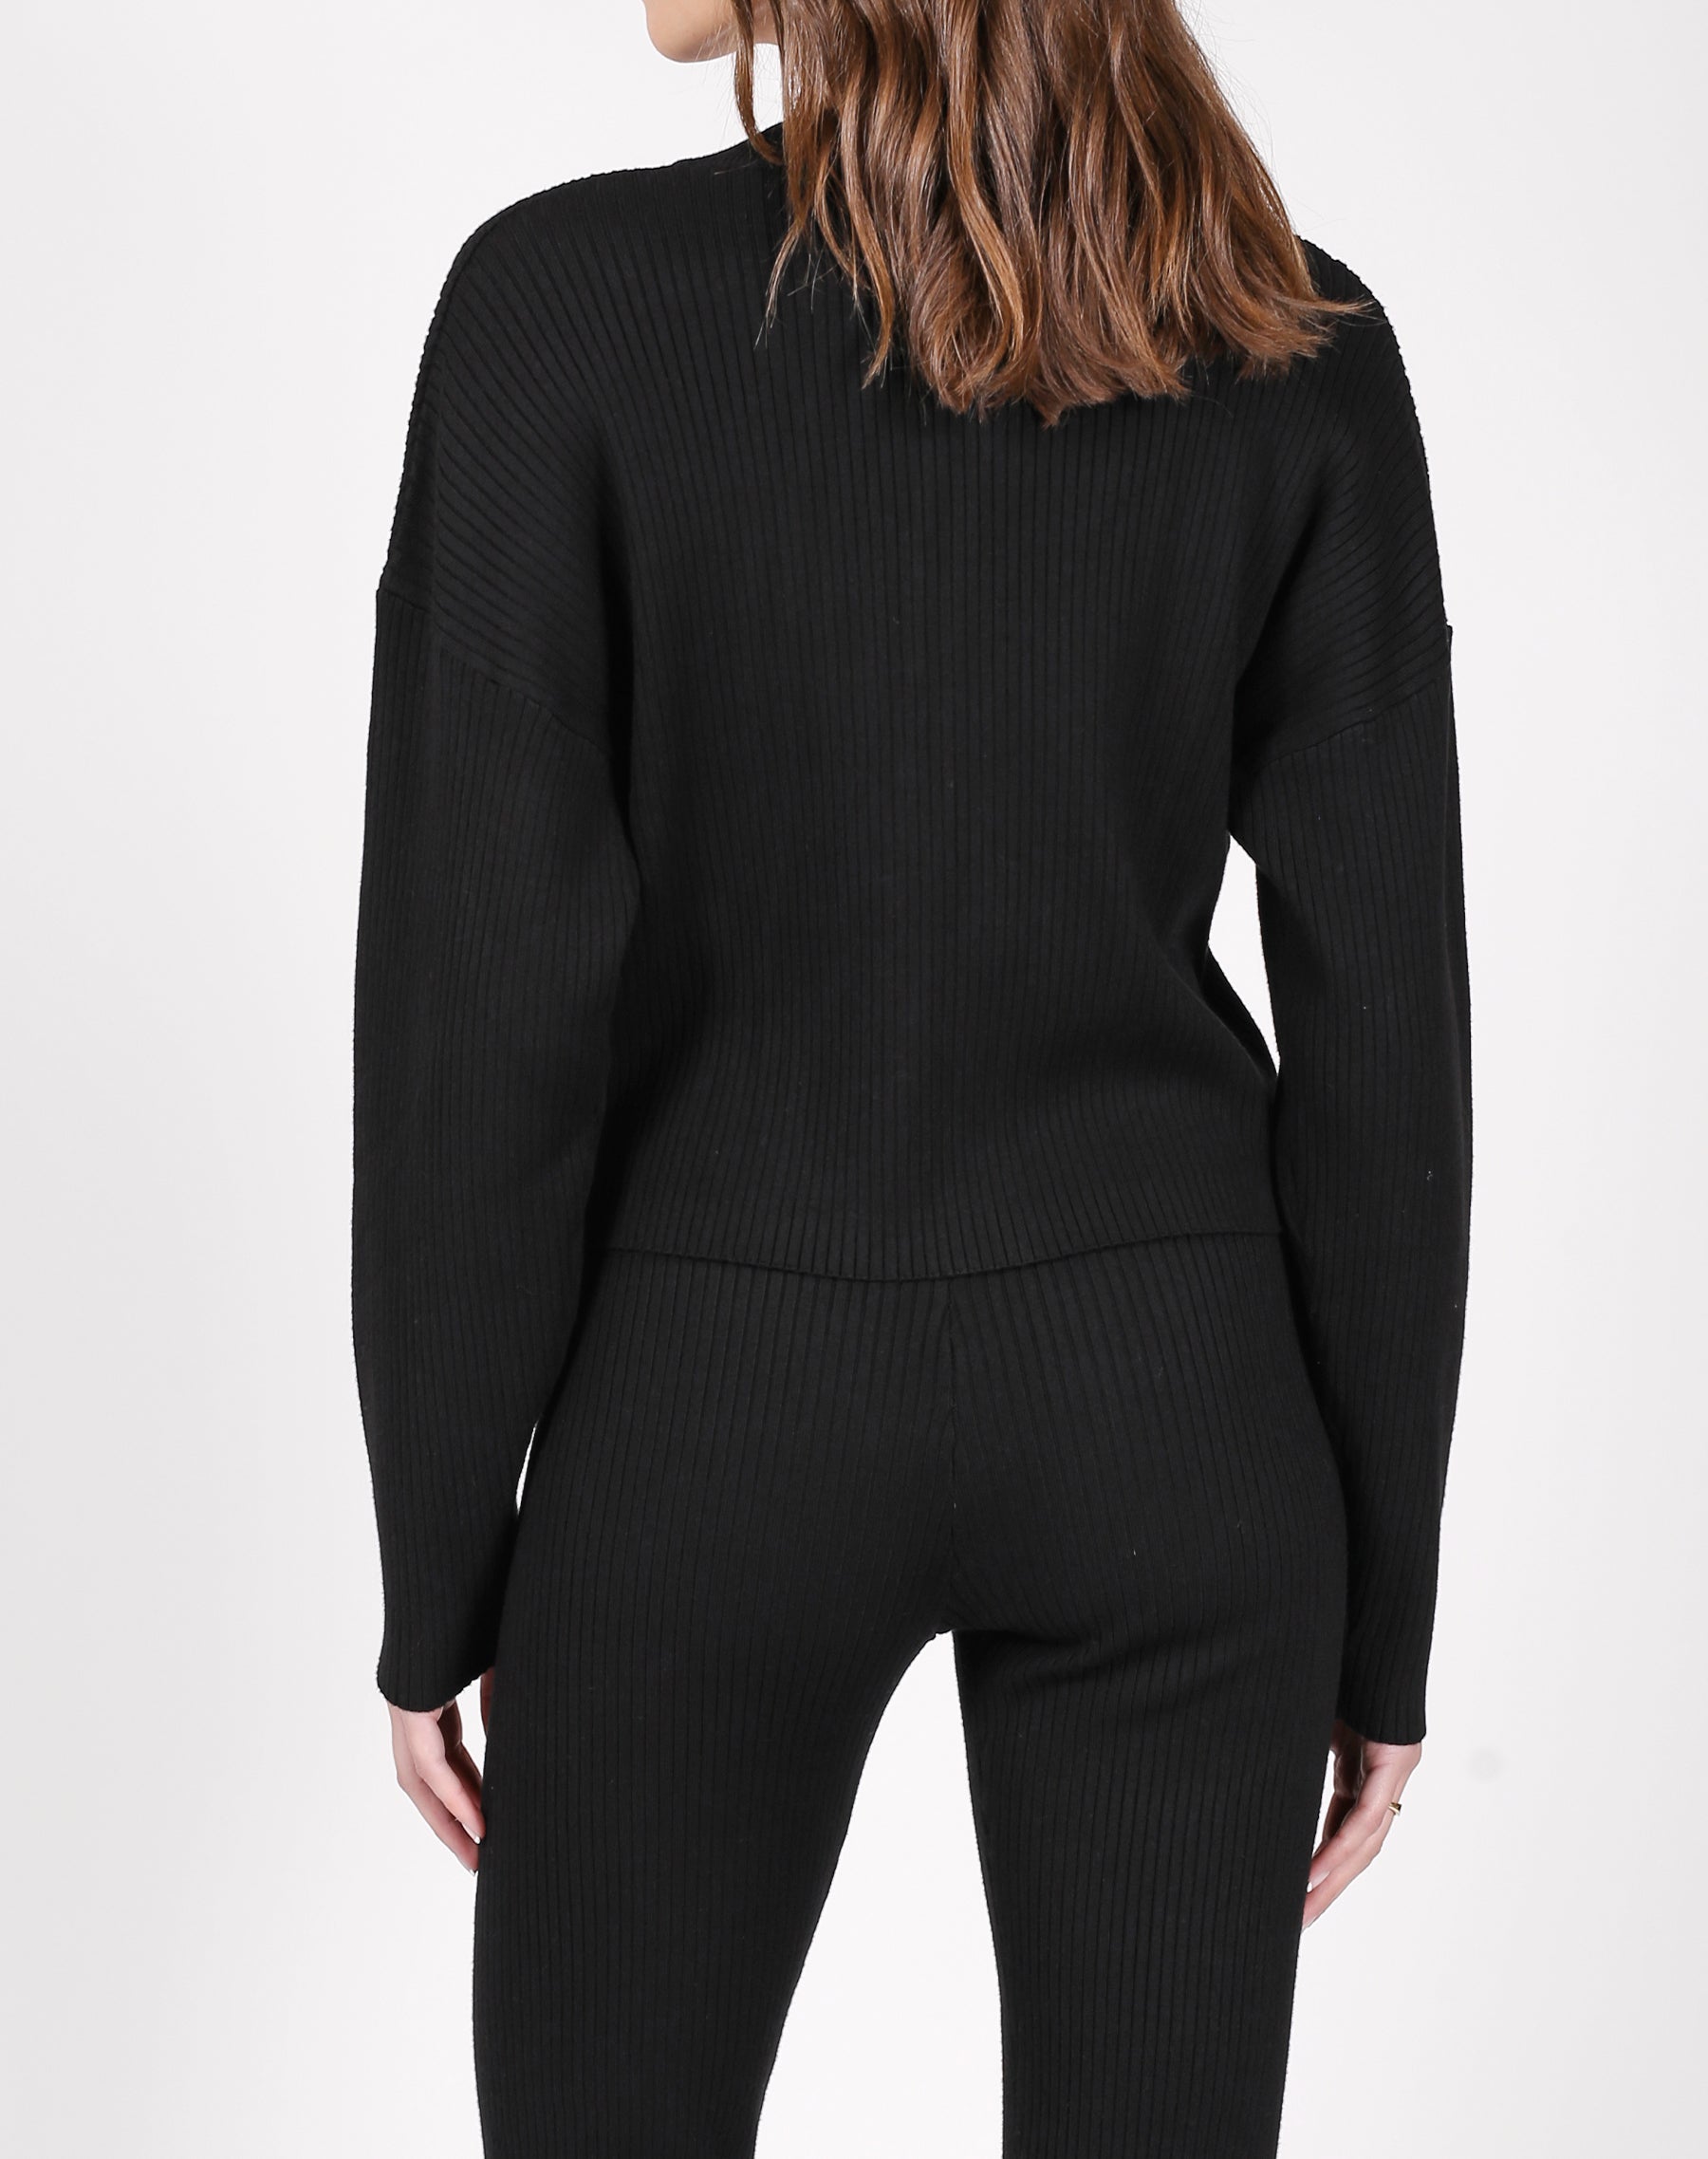 The Best Friend Ribbed Cardigan | Black